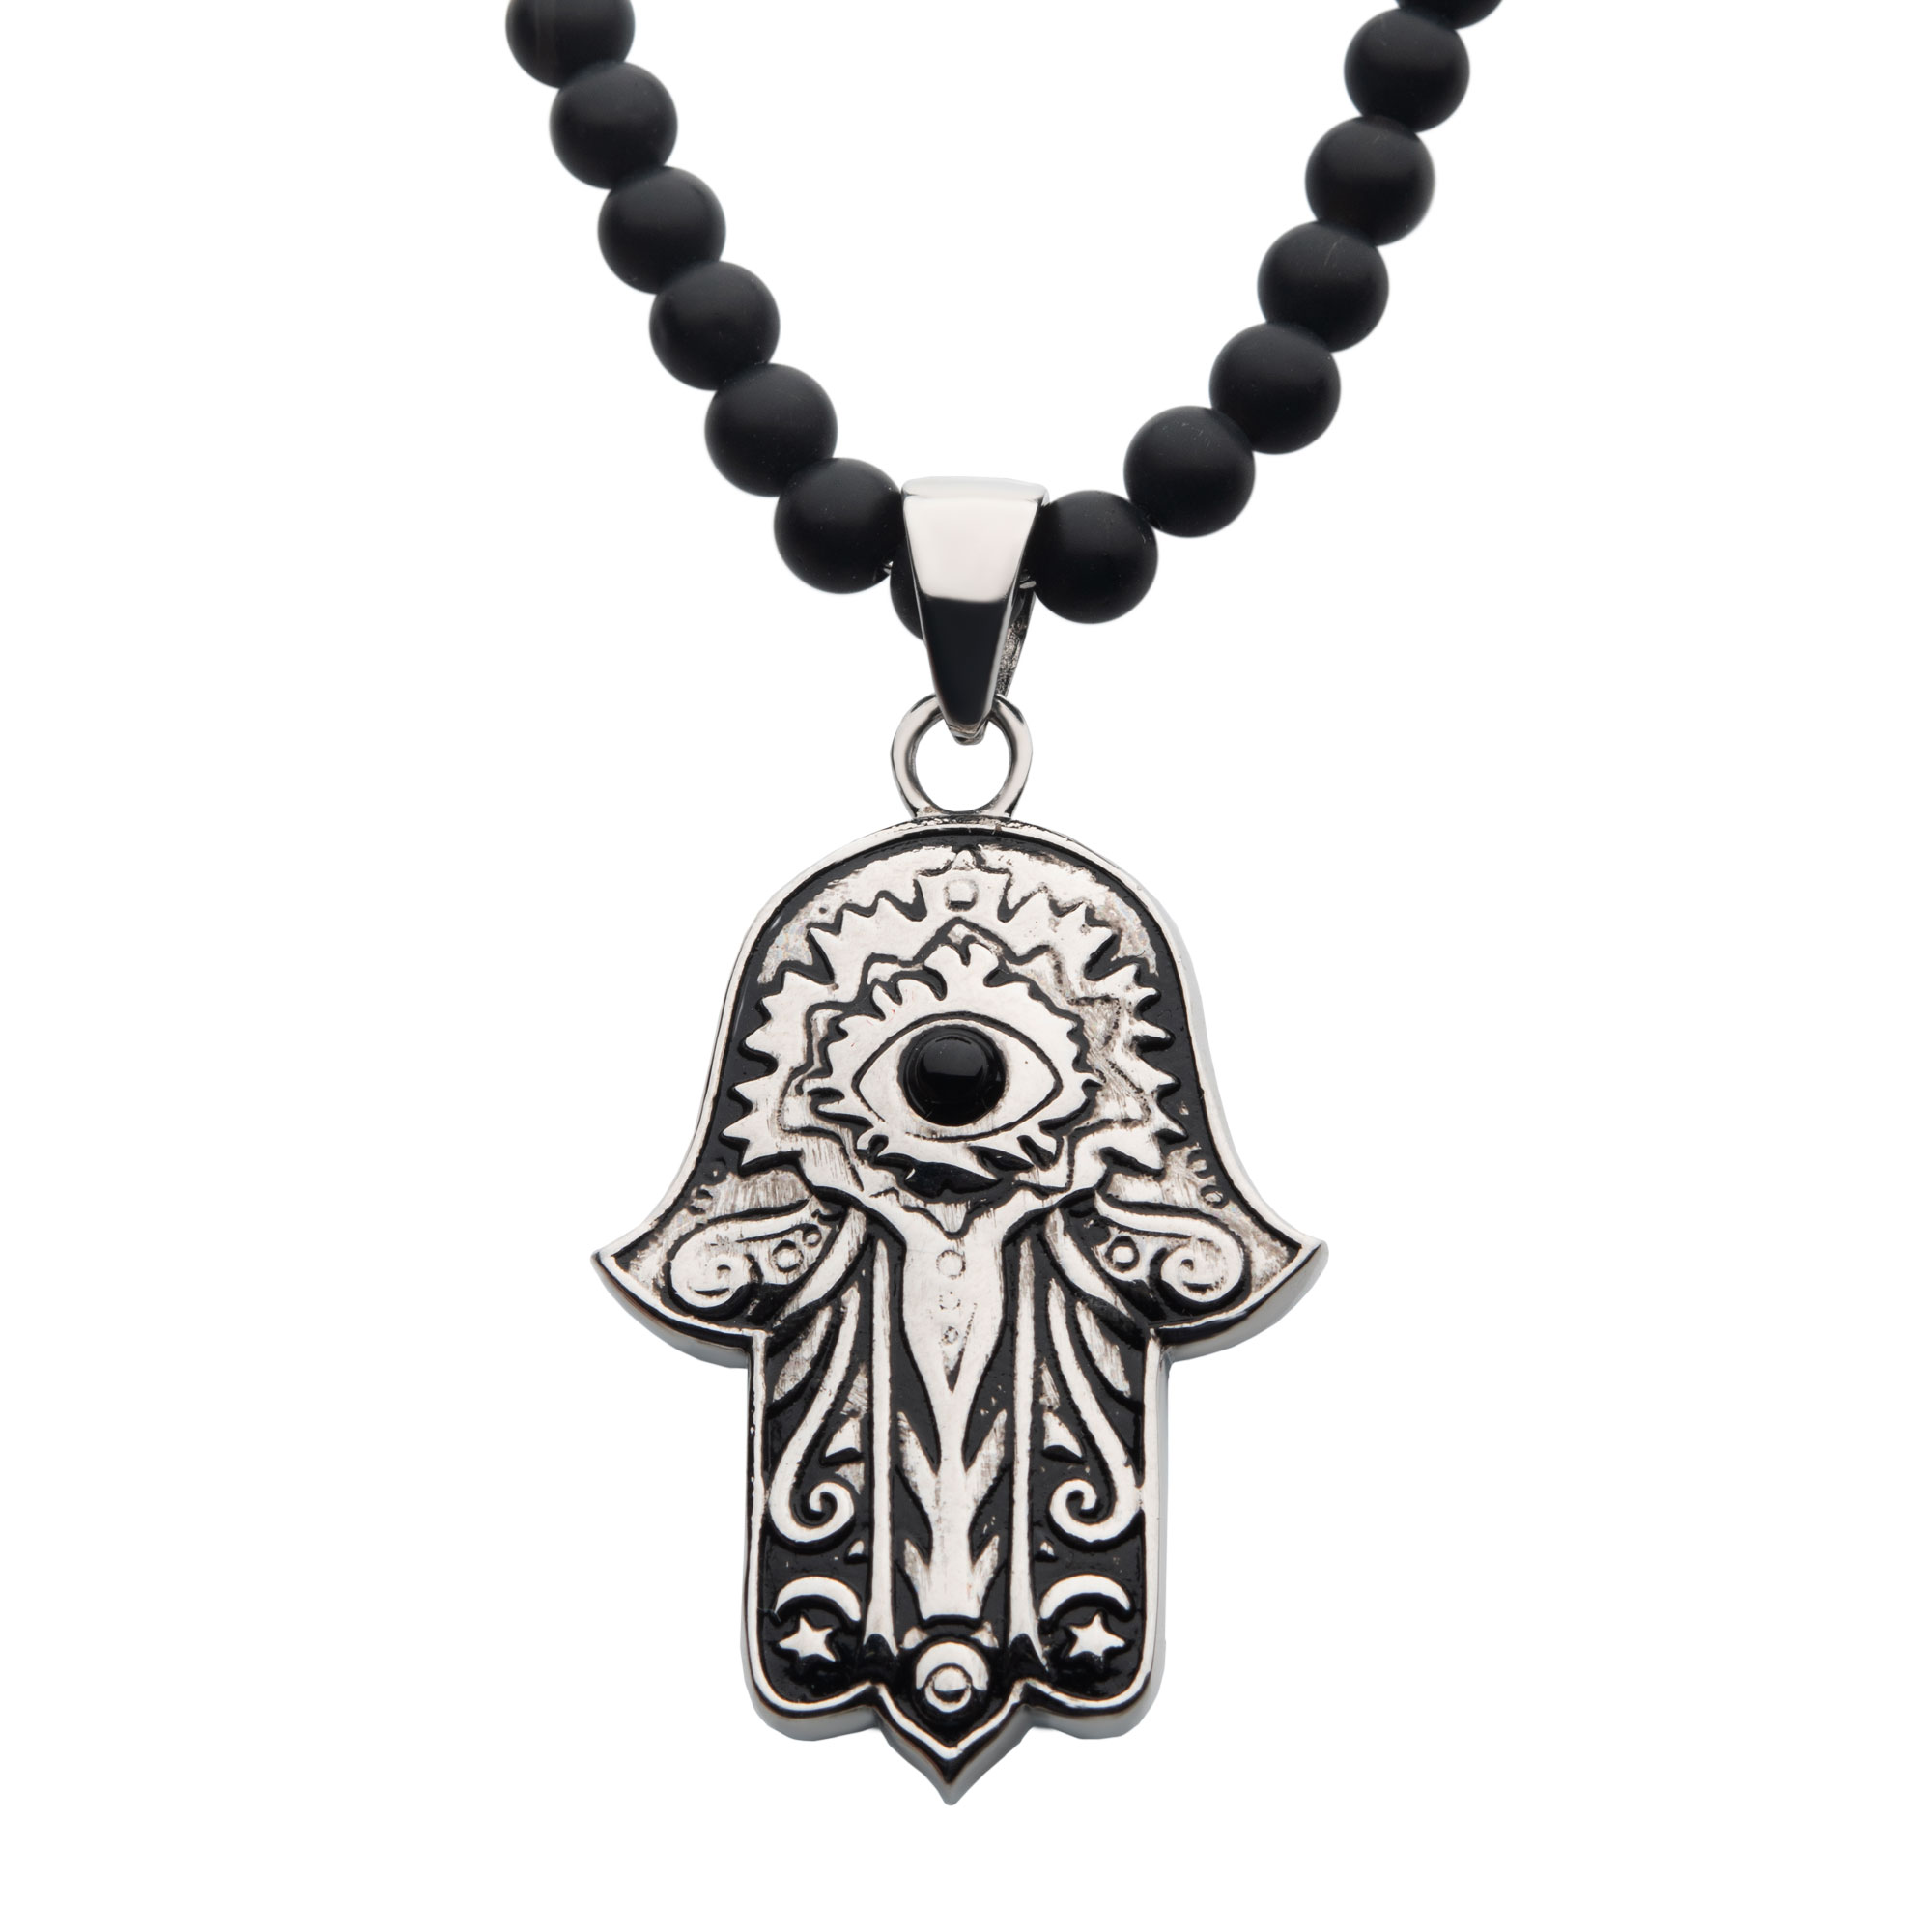 Stainless Steel with Centerpiece Black Agate Stone Hamsa Pendant, with Black Agate Stone Bead Necklace Lewis Jewelers, Inc. Ansonia, CT